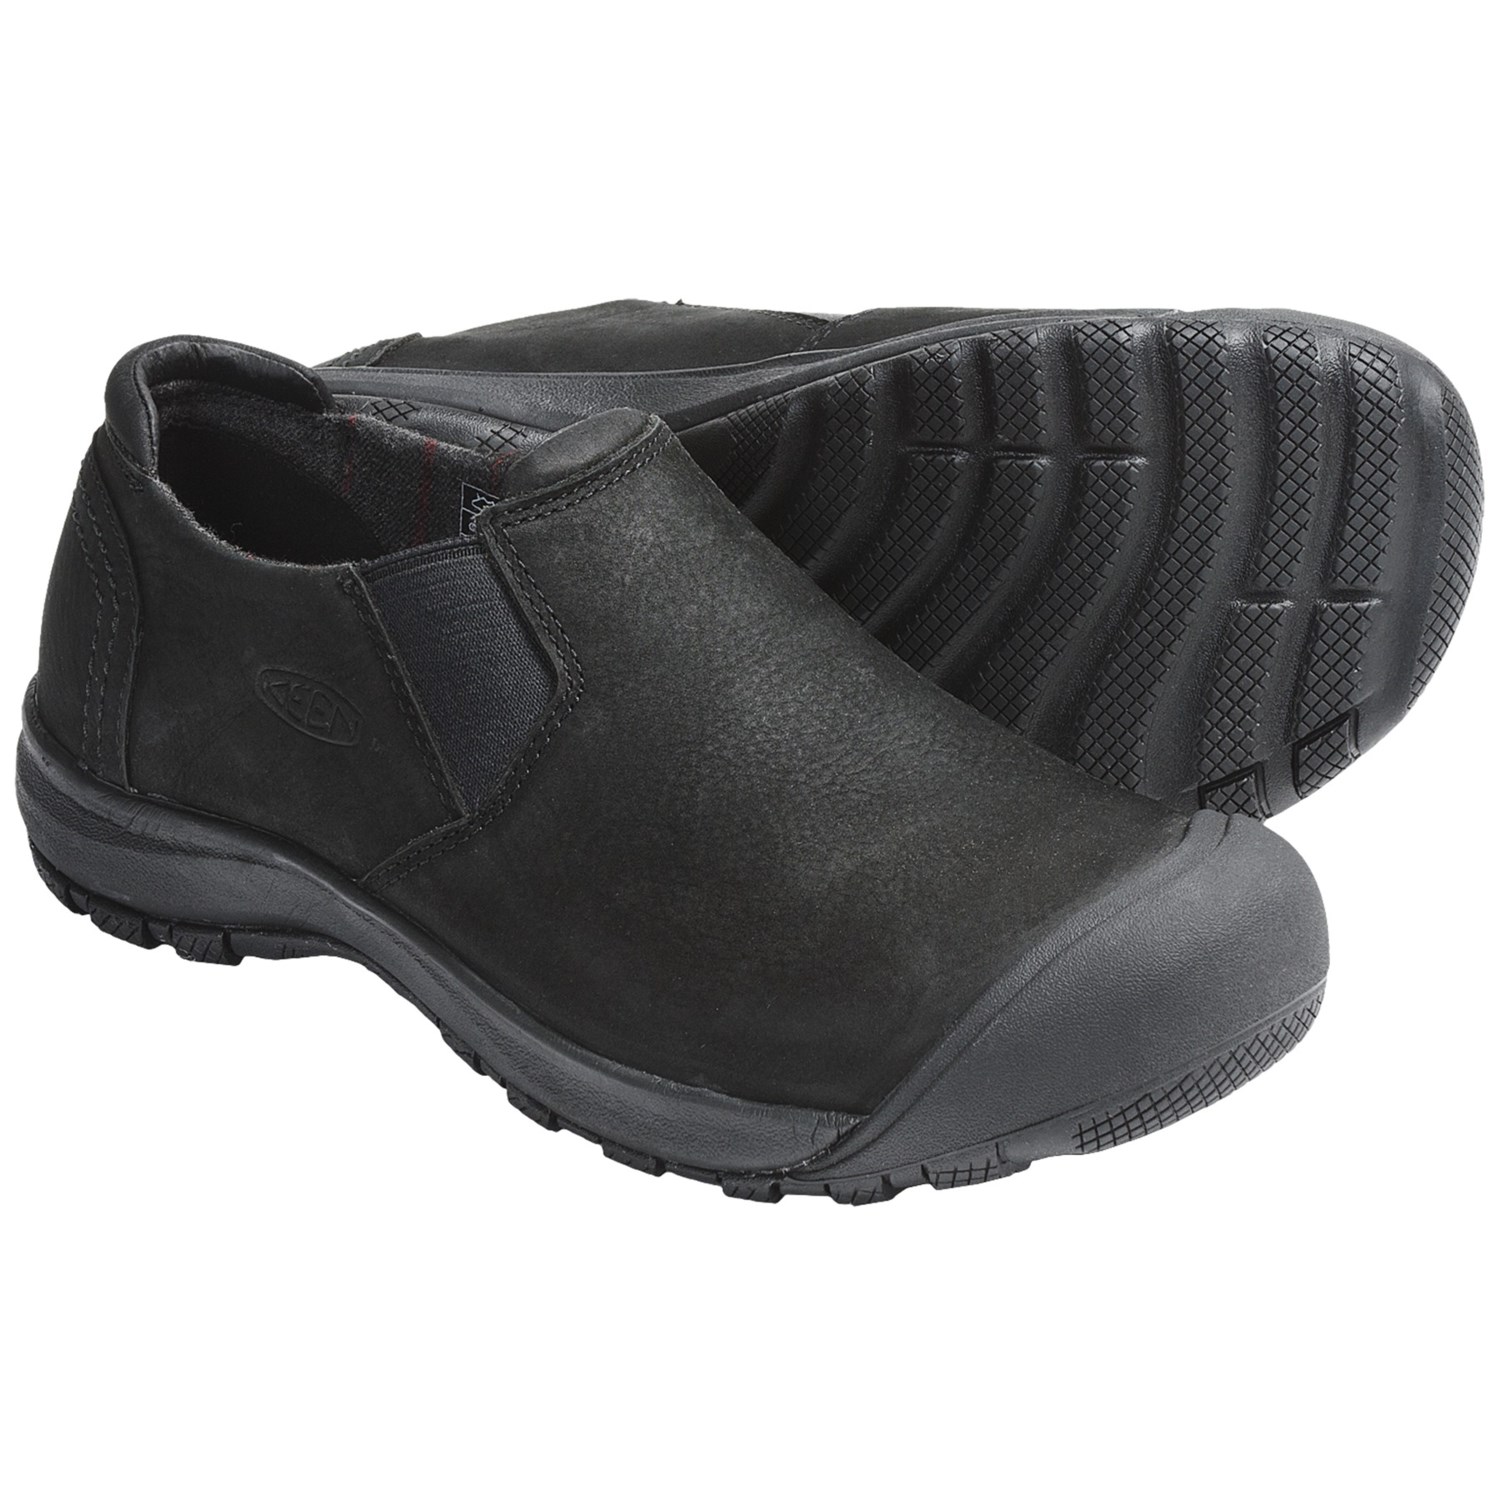 Keen Pearson Shoes - Nubuck, Slip-Ons (For Men) - Save 30%